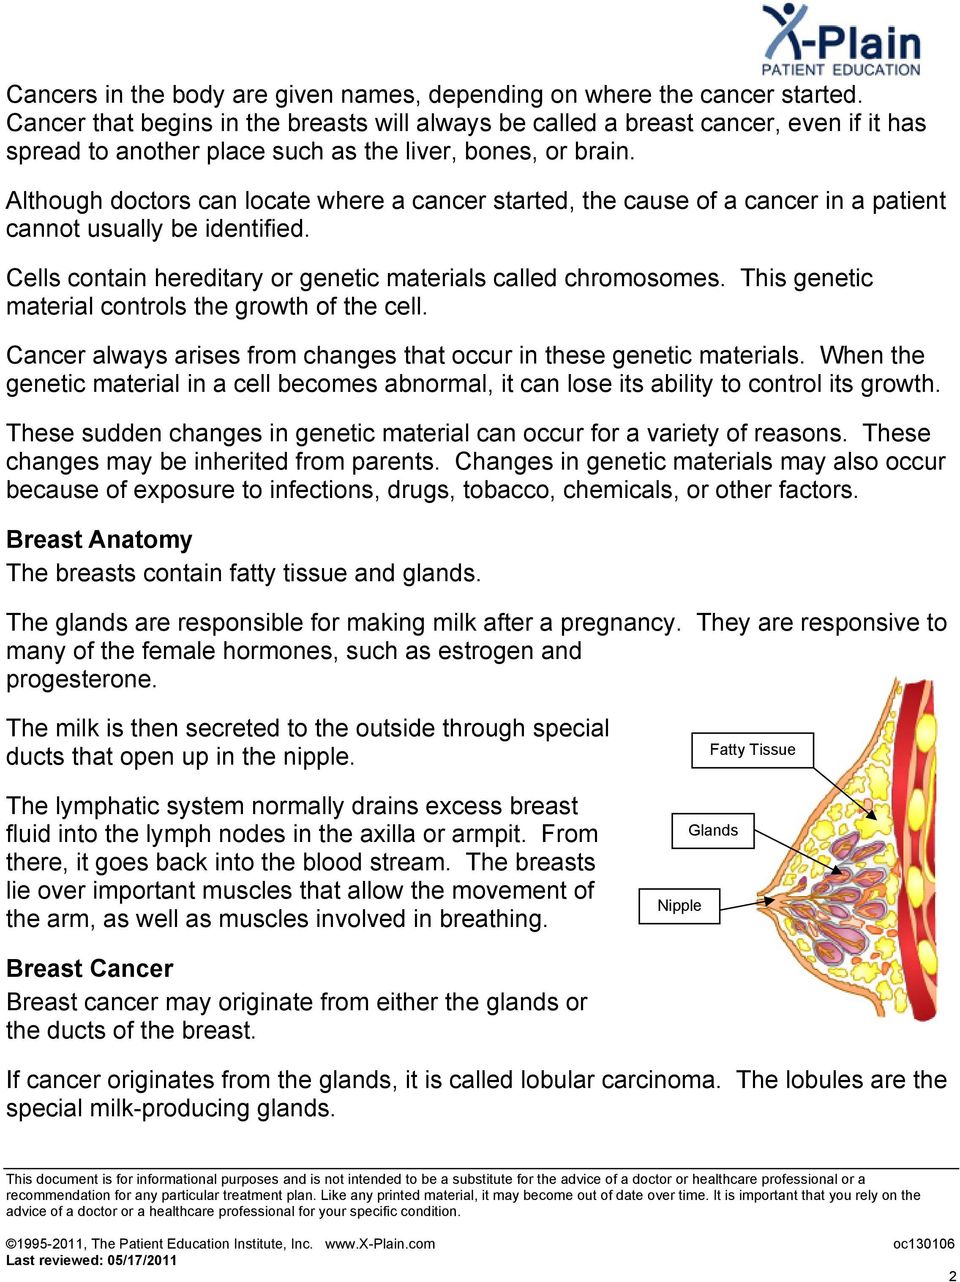 Although doctors can locate where a cancer started, the cause of a cancer in a patient cannot usually be identified. Cells contain hereditary or genetic materials called chromosomes.